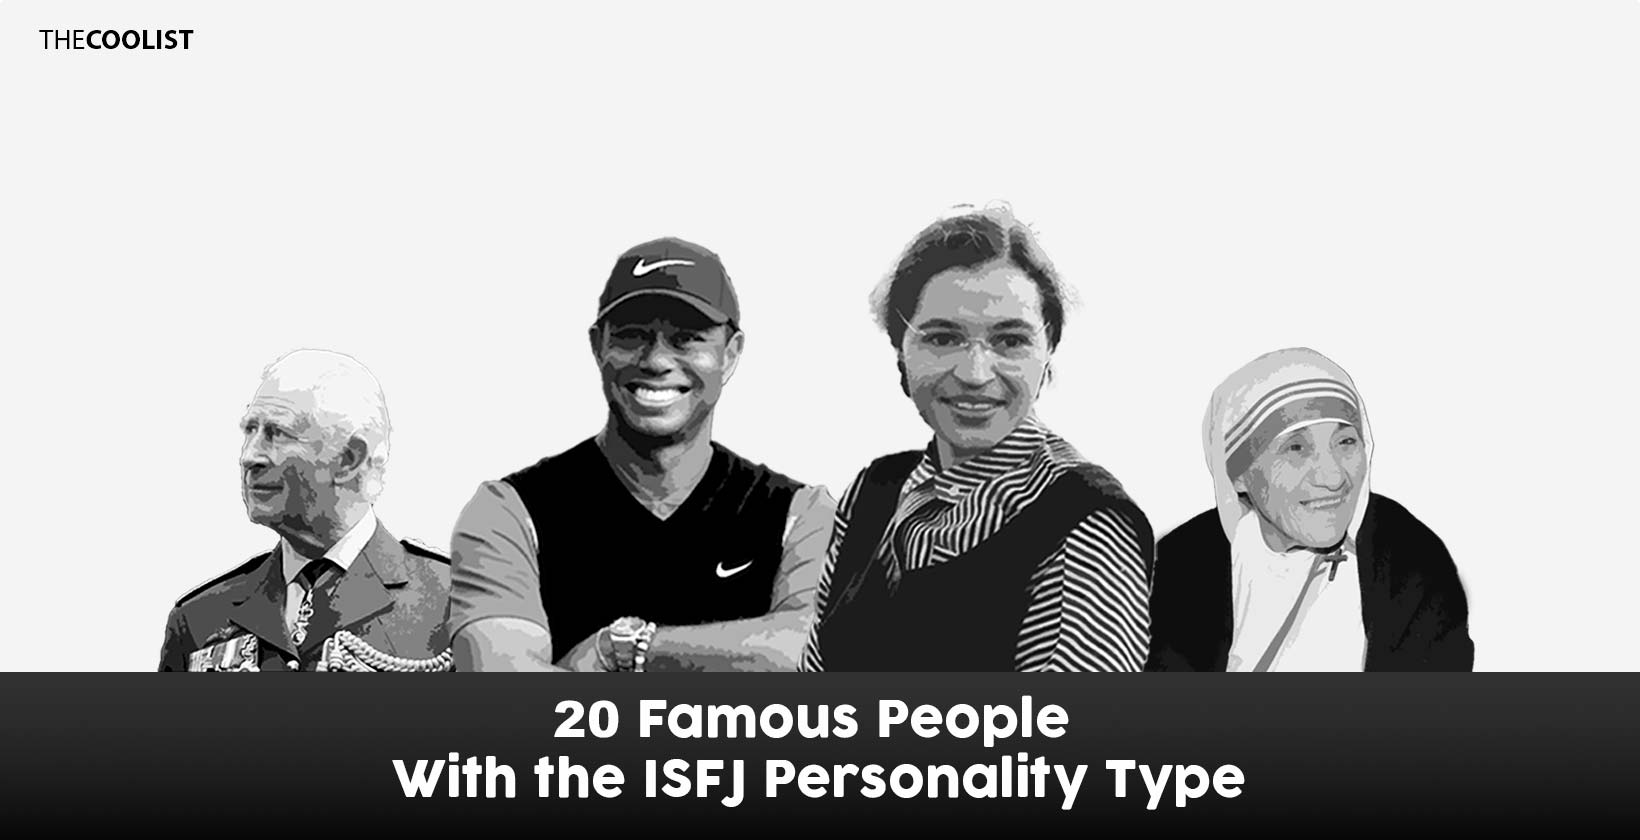 20 Famous People With the ISFJ Personality Type